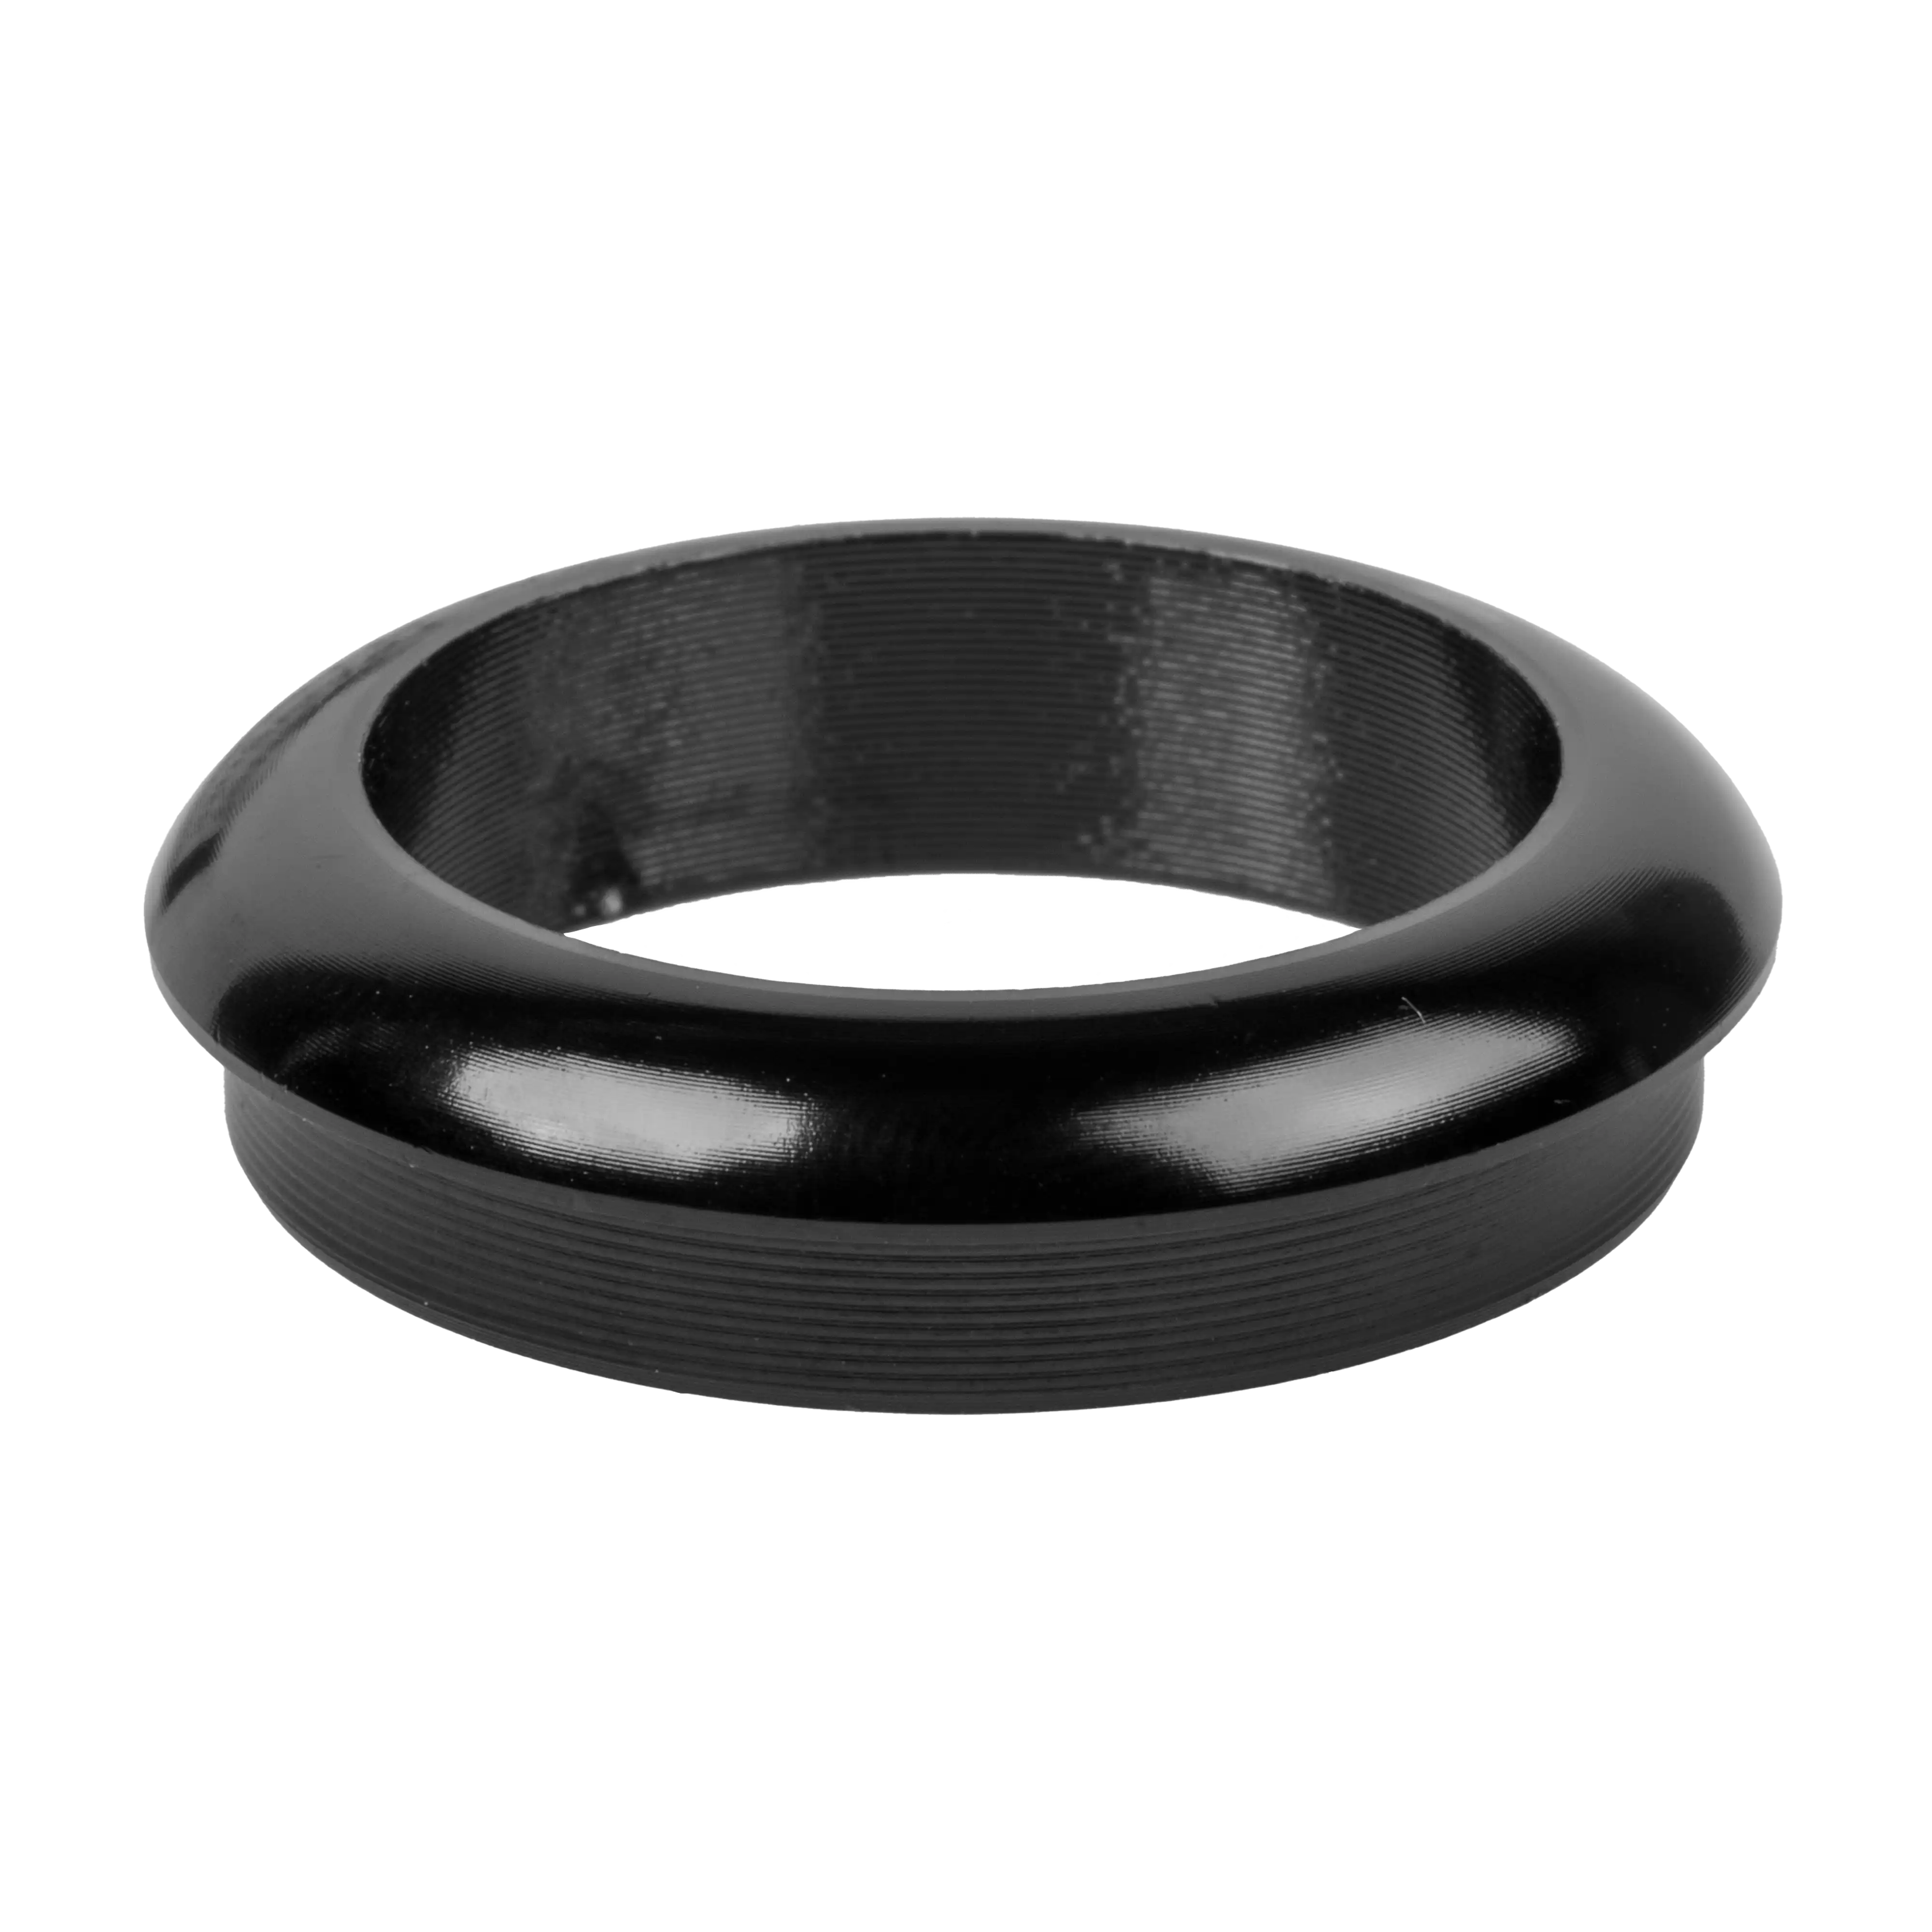 Trim Ring for G2 12" Saltwater Carbon Handle System